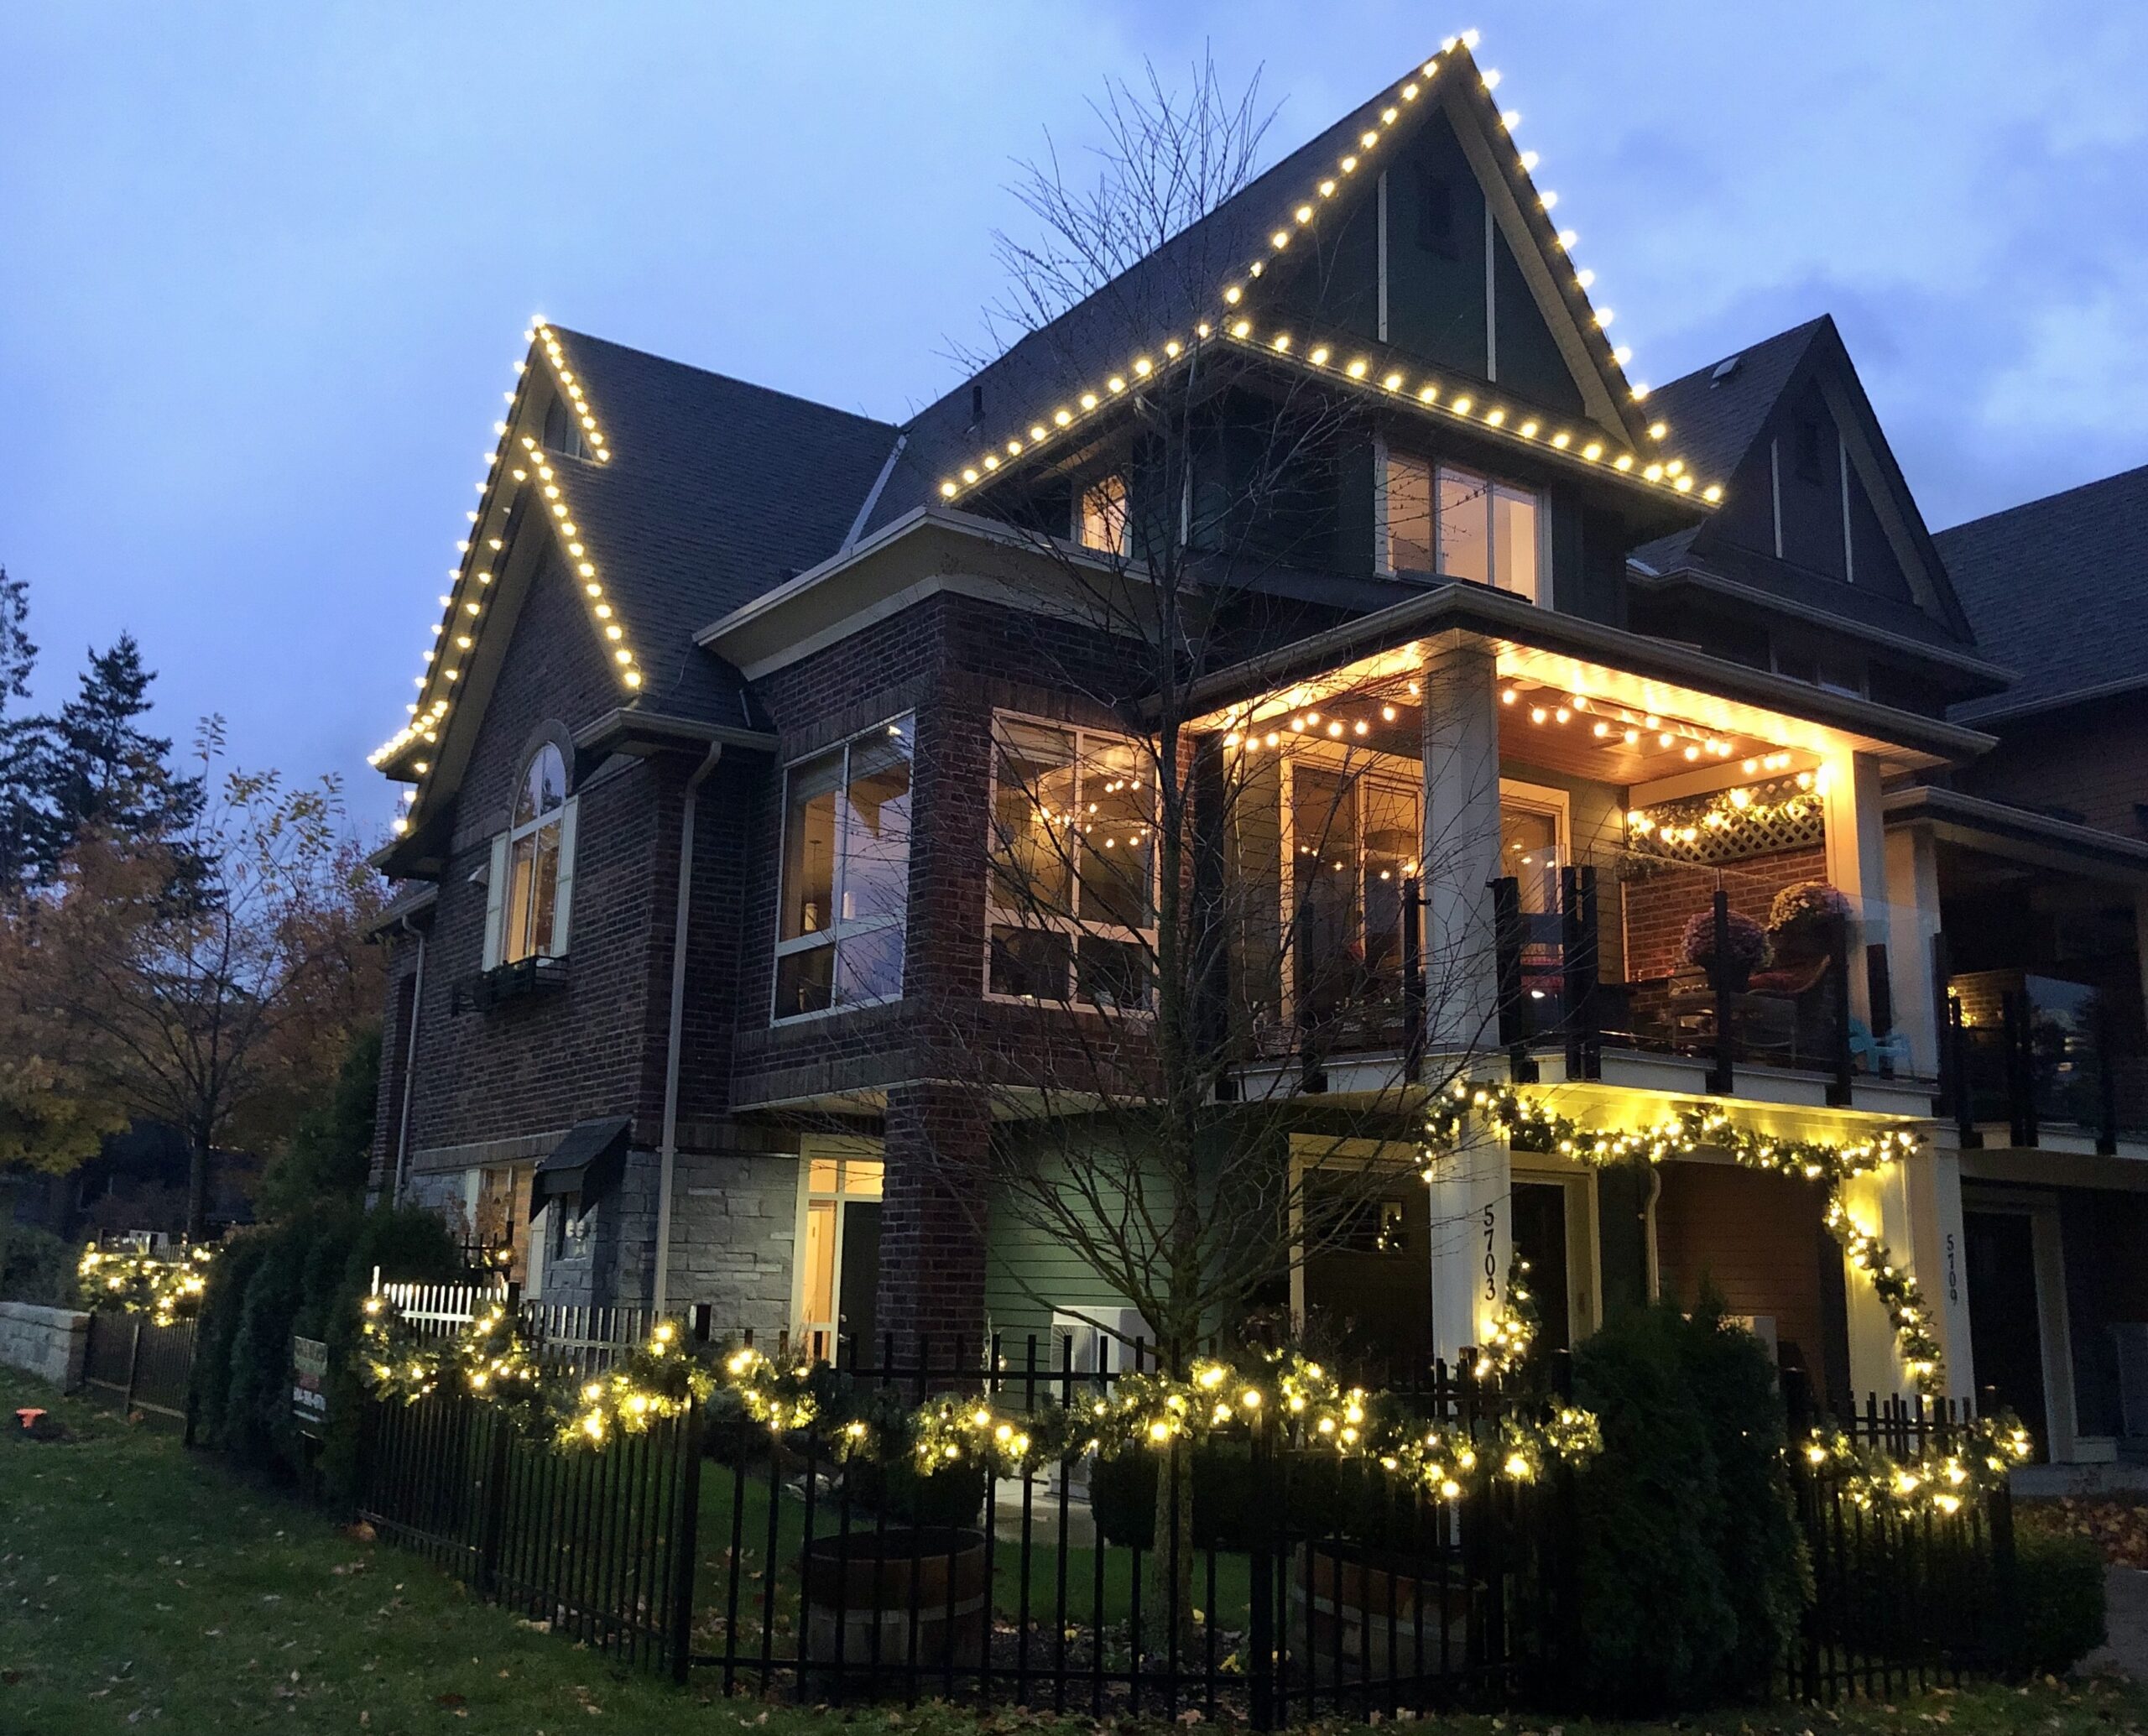 Holiday Lights Installers Near Me